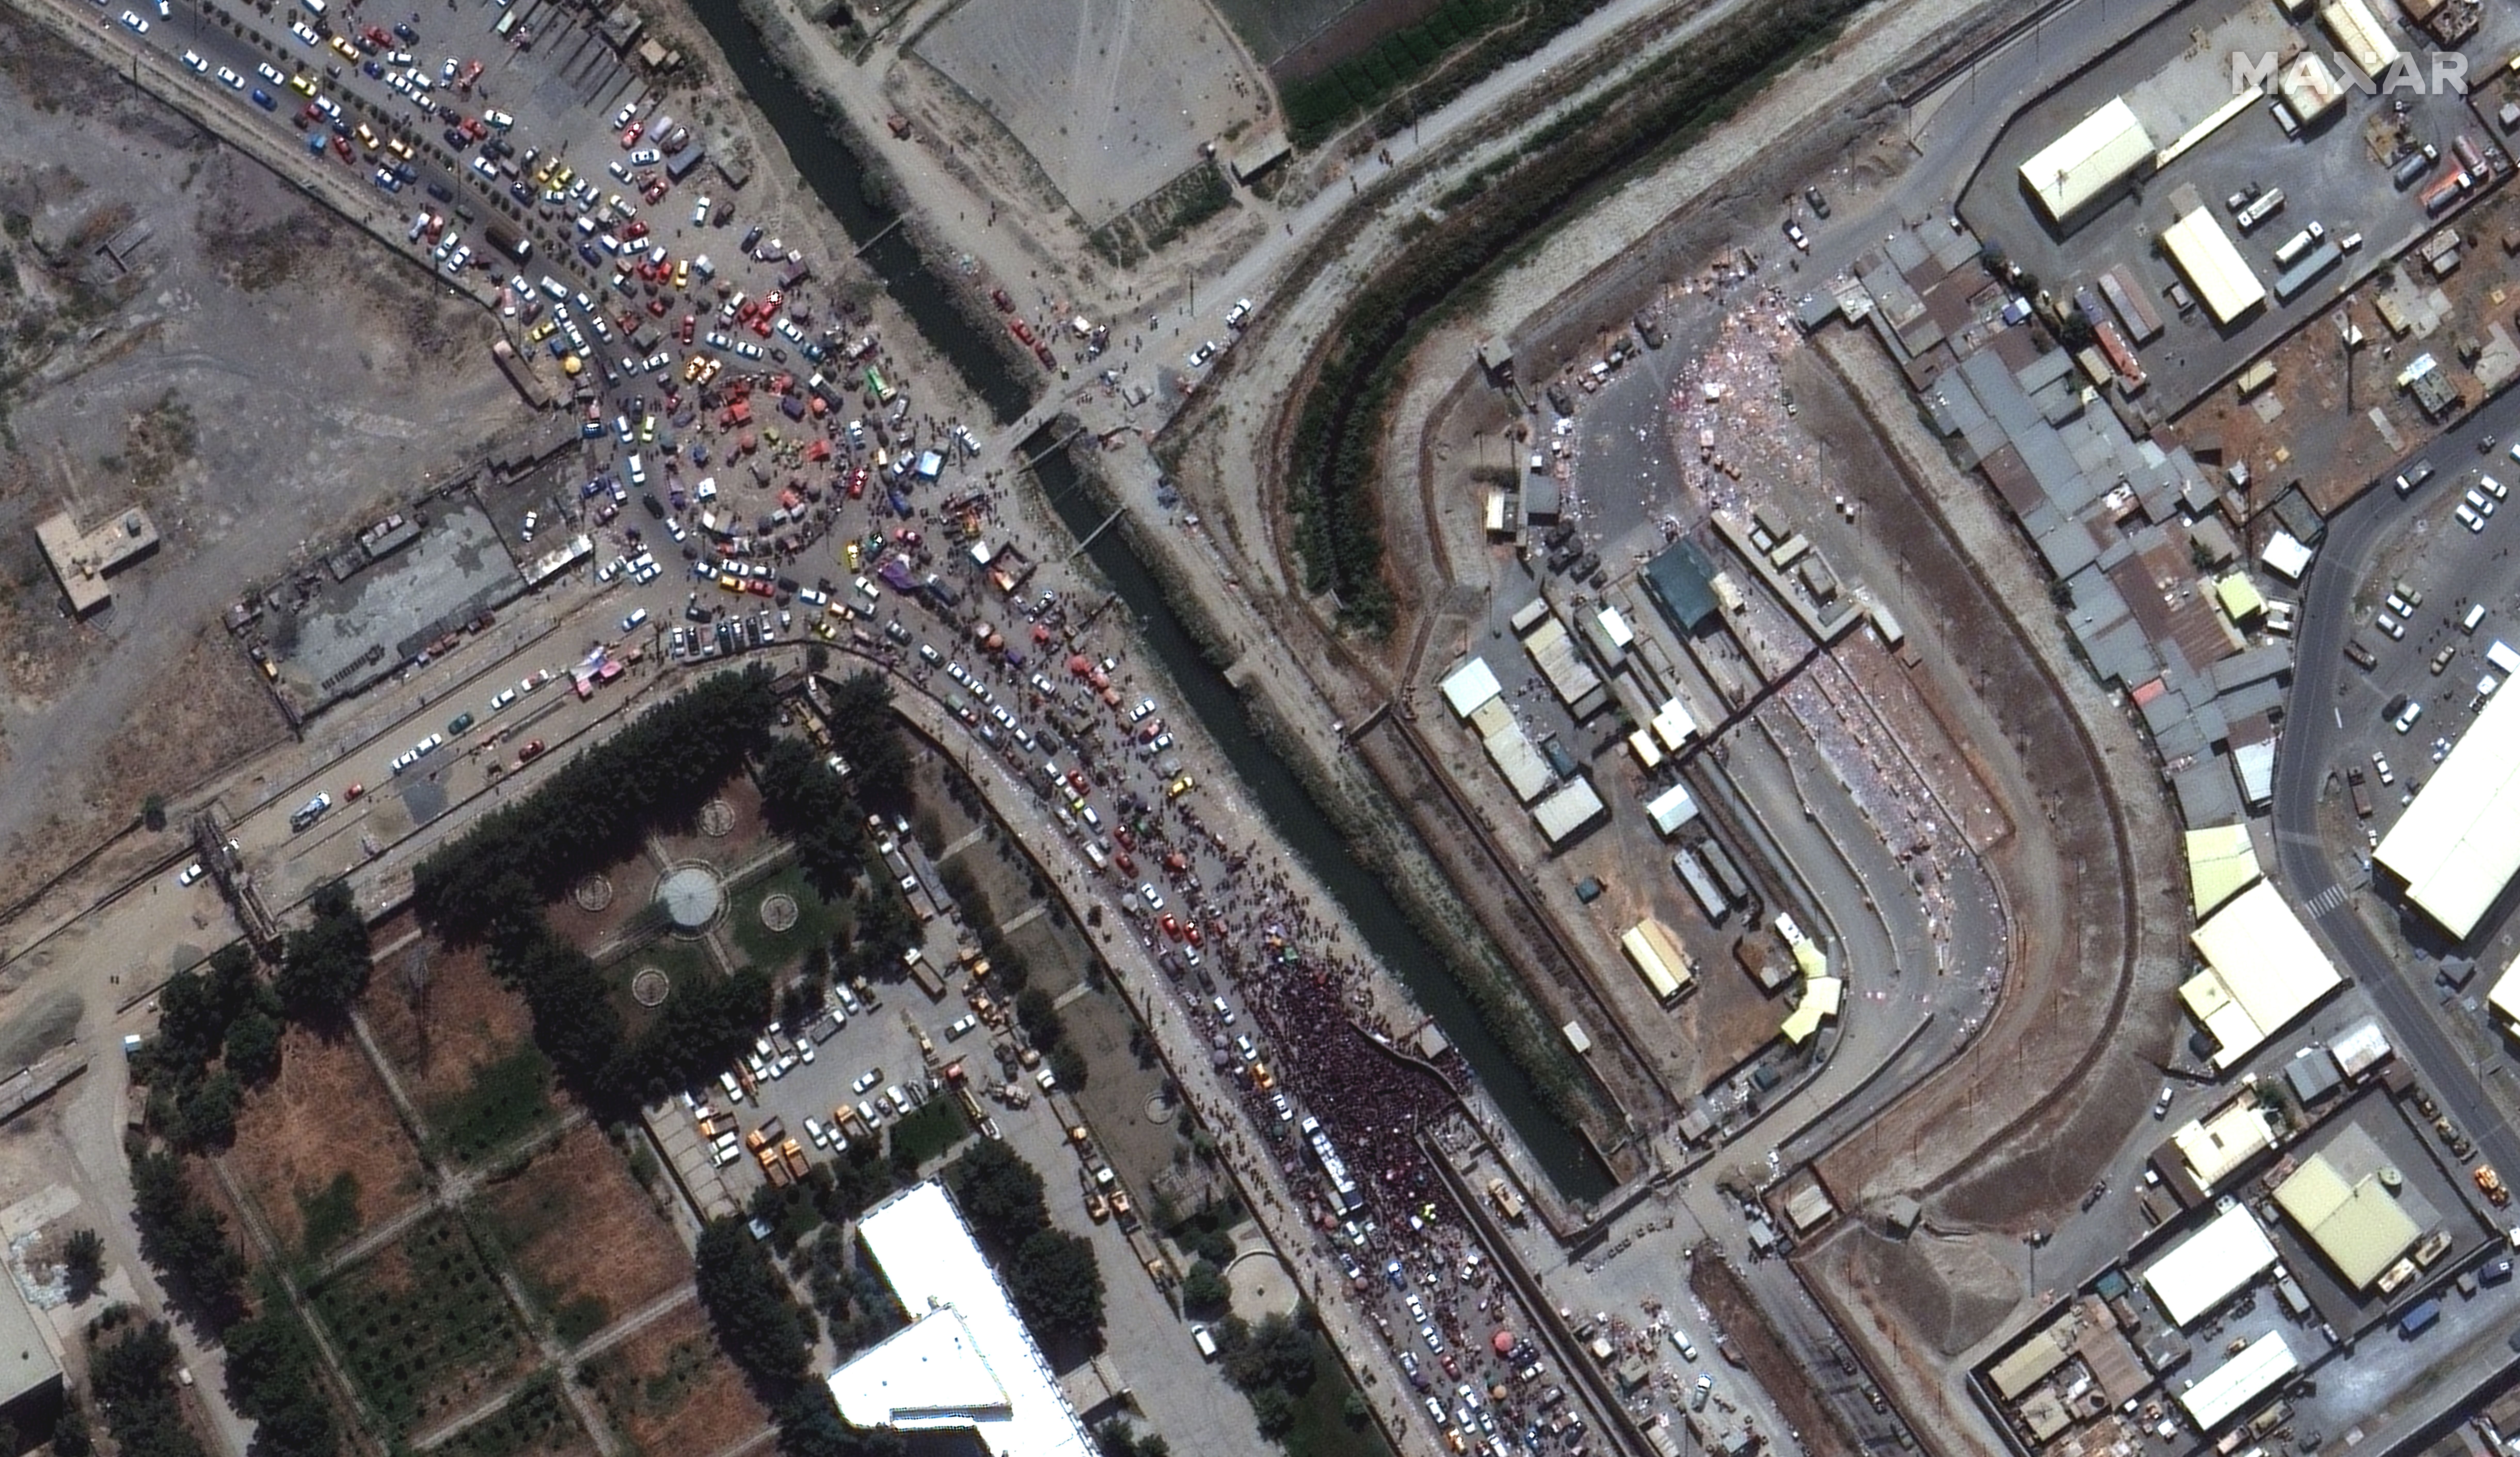 A satellite image of large crowds near the gate of the northern edge of Kabul's airport on Aug. 23